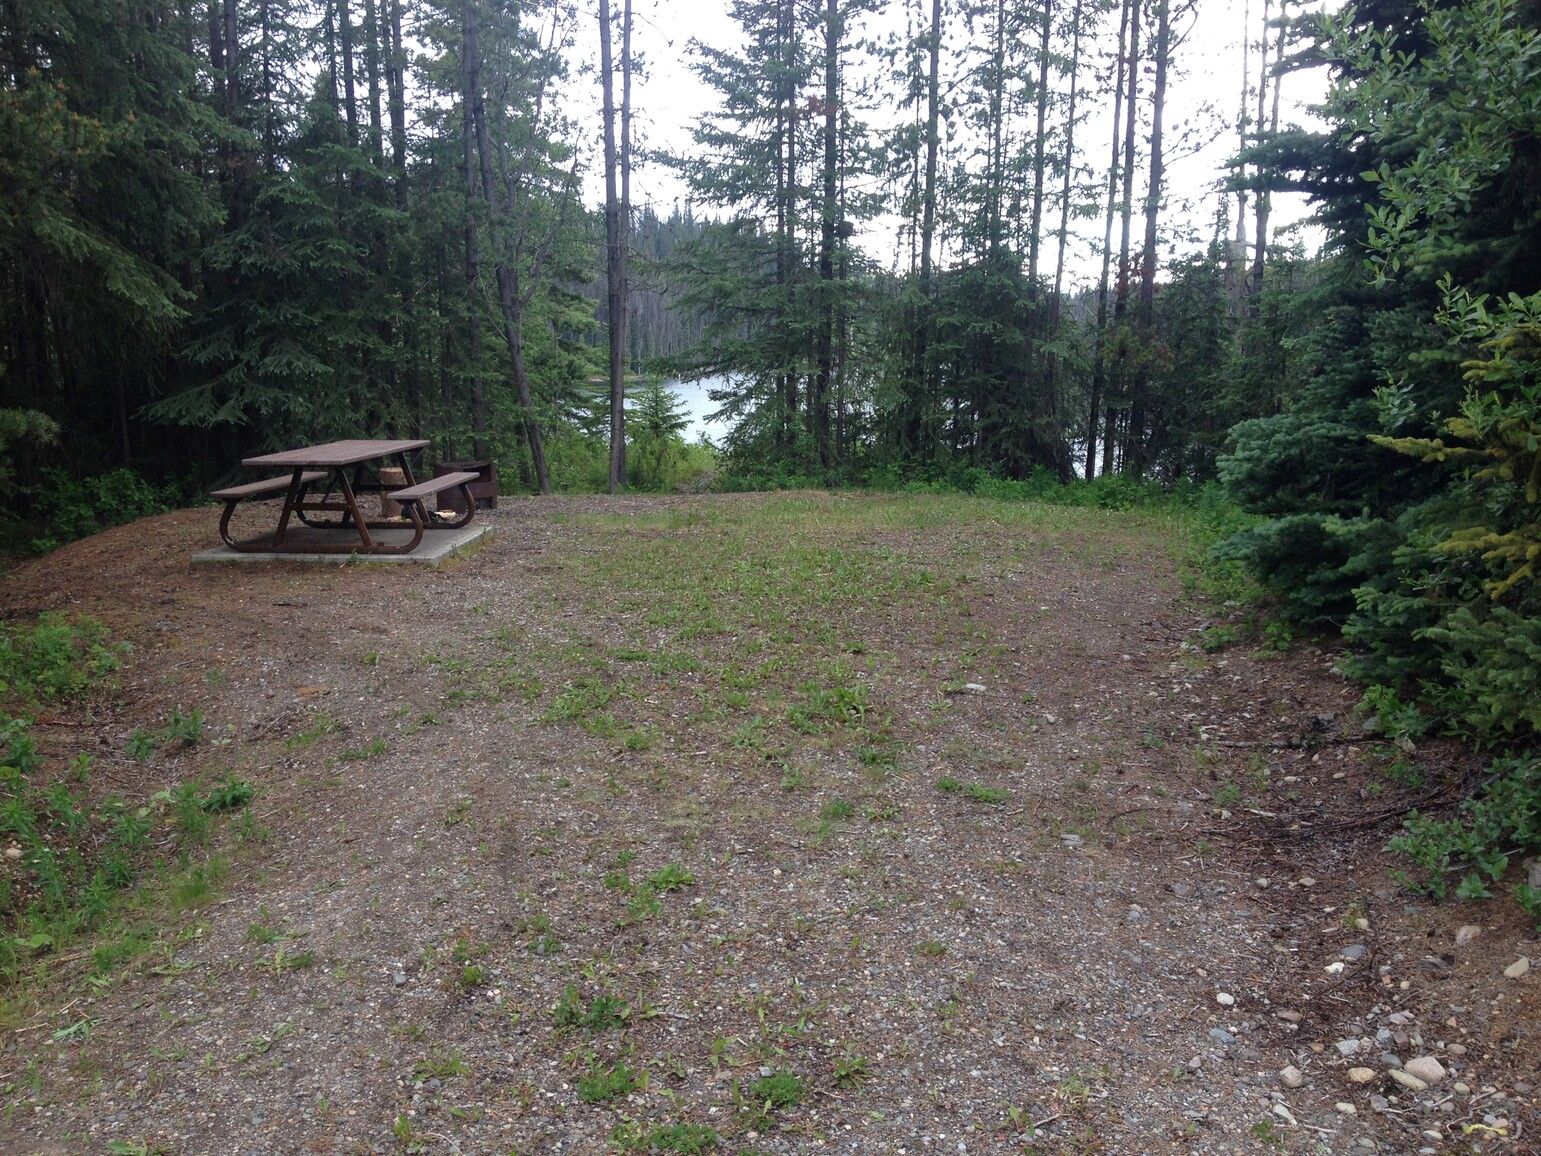 One of eight first-come, first-serve campsites in Little Andrews Bay Marine Park.